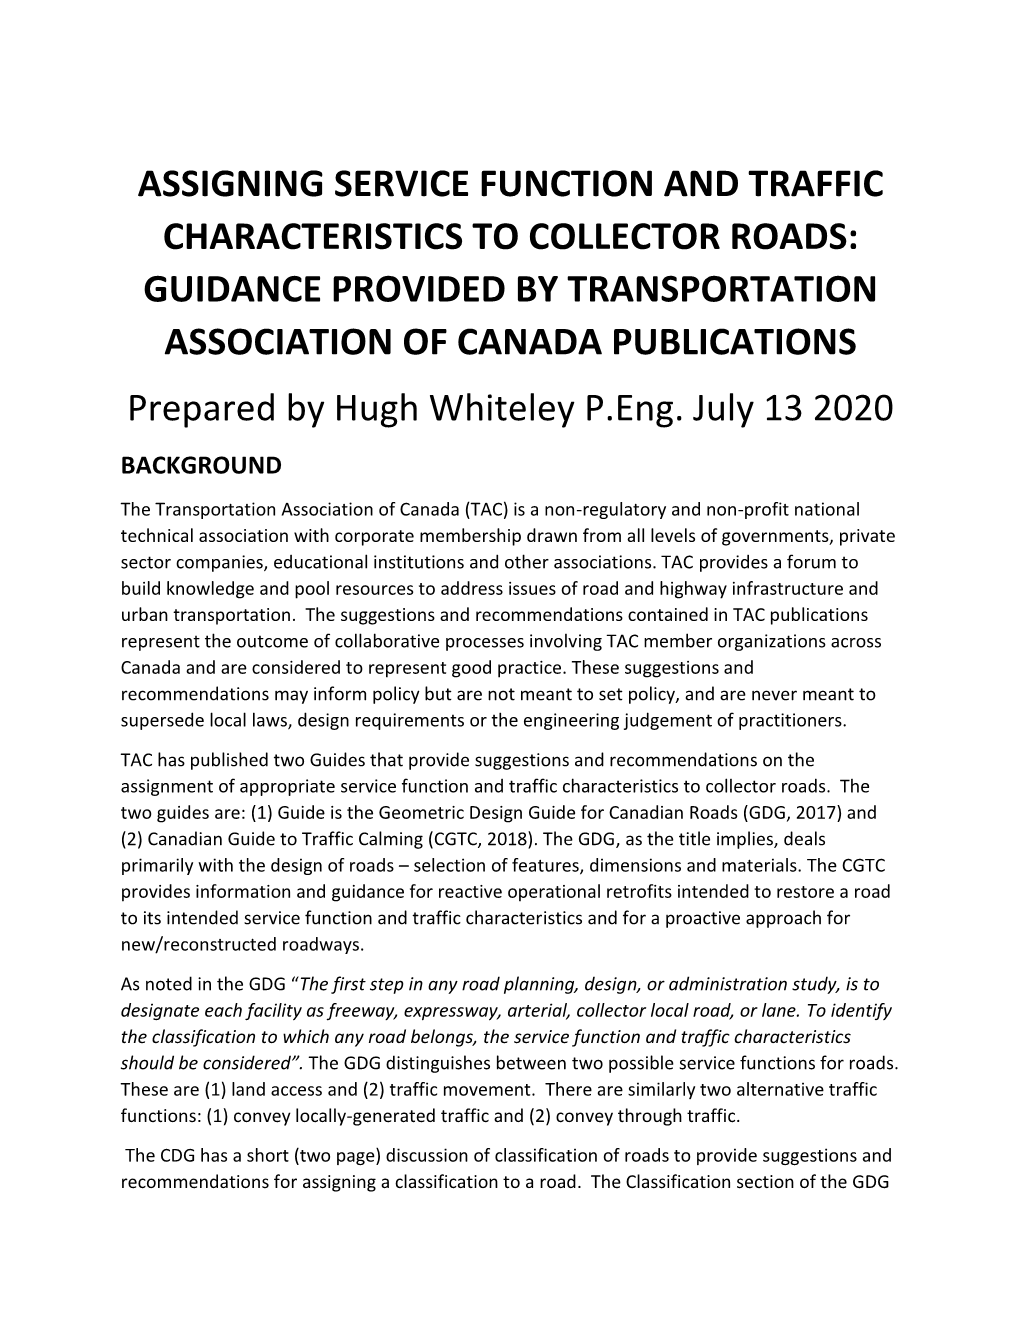 Assigning Service Function and Traffic Characteristics to Collector Roads: Guidance Provided by Transportation Asso